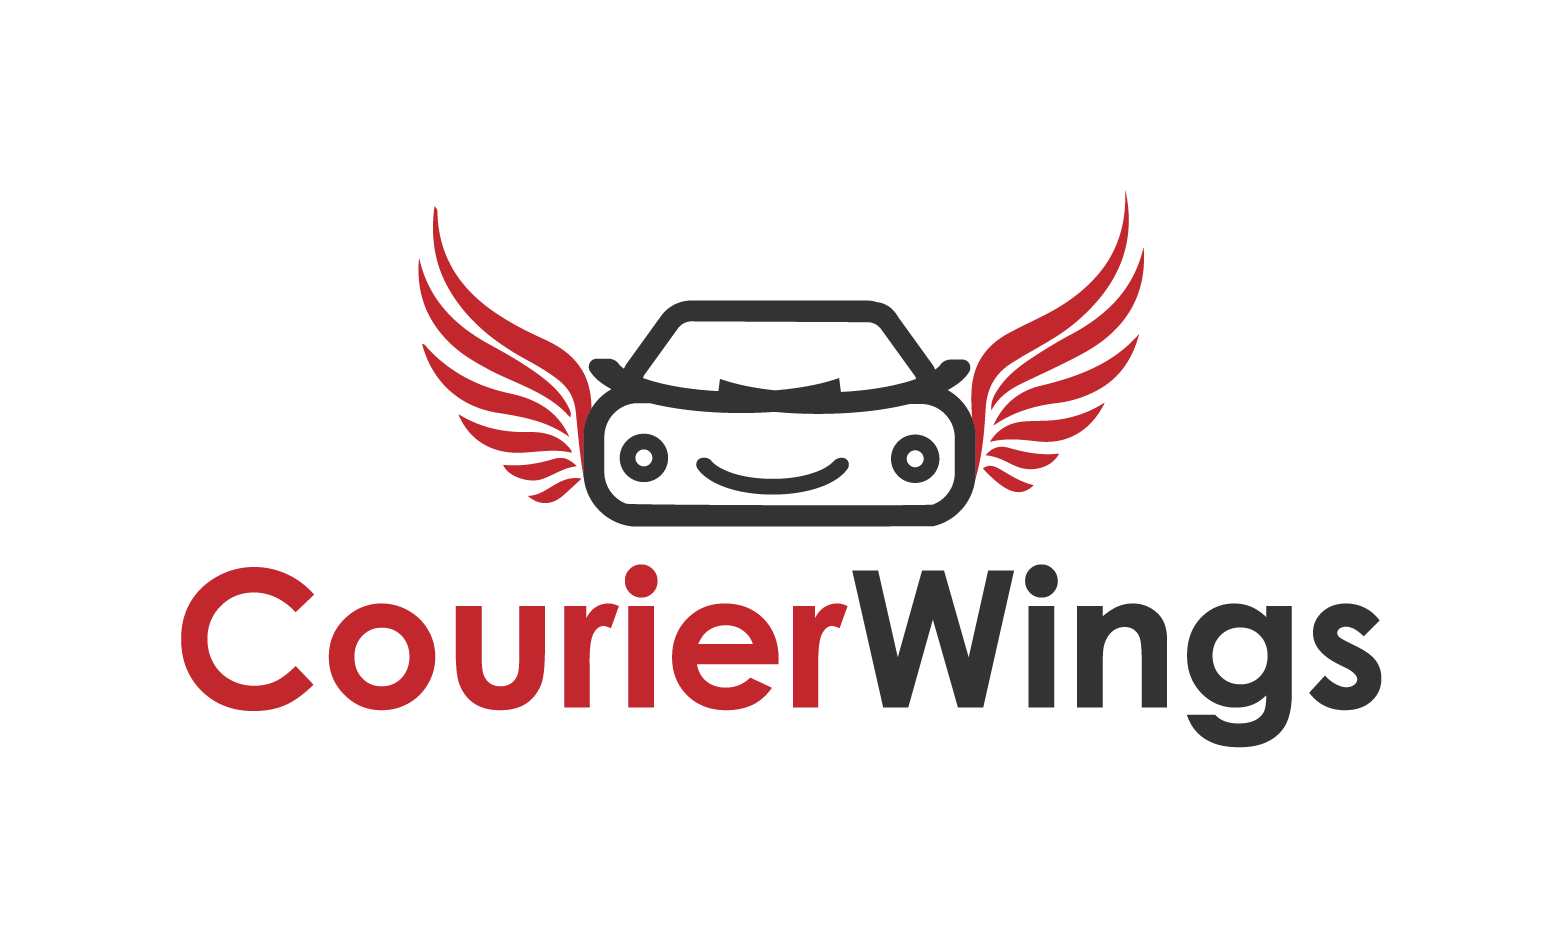 CourierWings.com - Creative brandable domain for sale